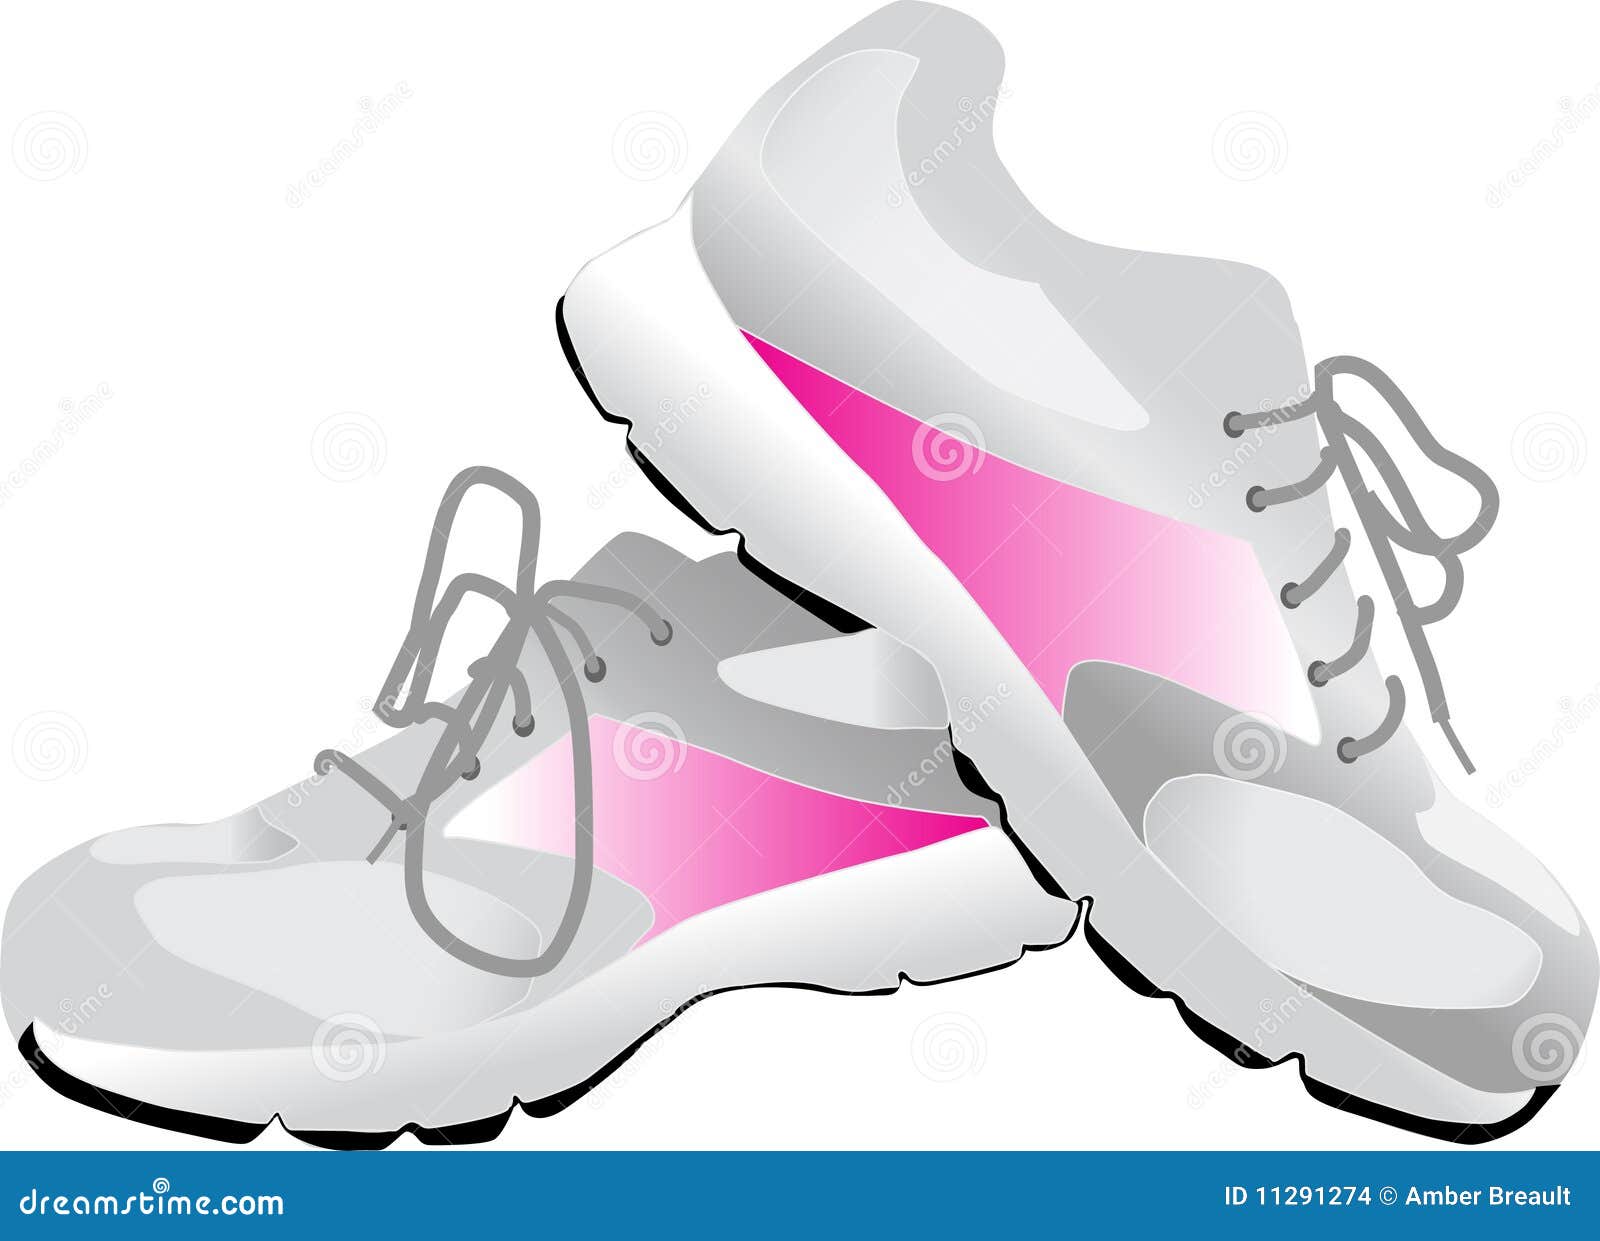 clipart trainers - photo #20